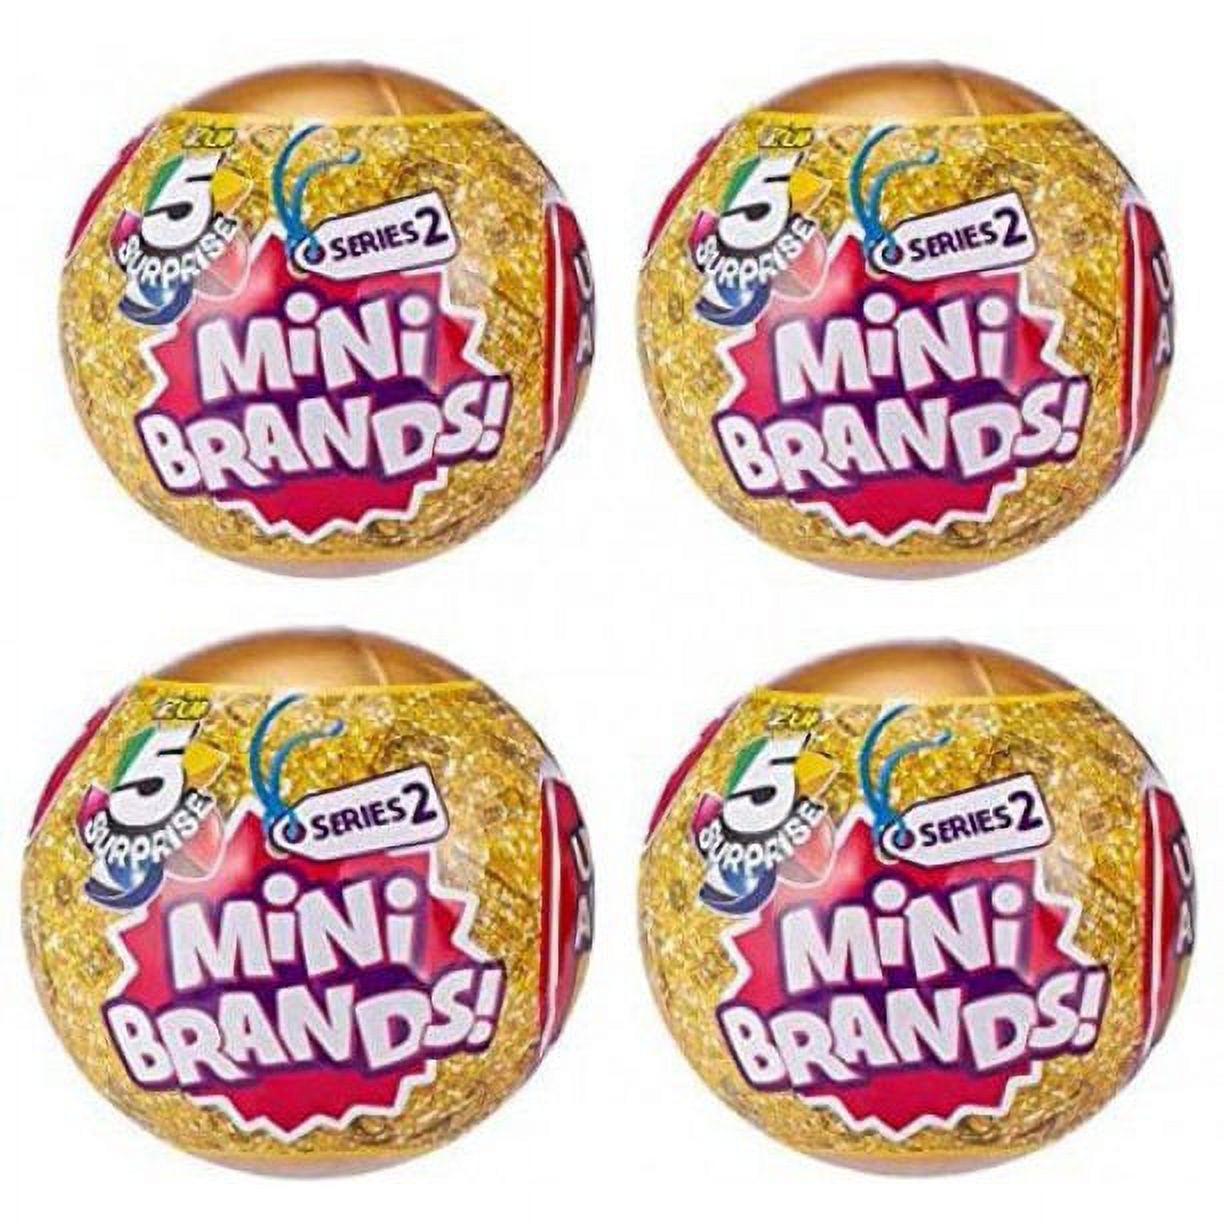 5 Surprise Mini Brands Mystery Capsule Real Miniature Brands Collectible Toy by ZURU (4 Pack) - image 1 of 2